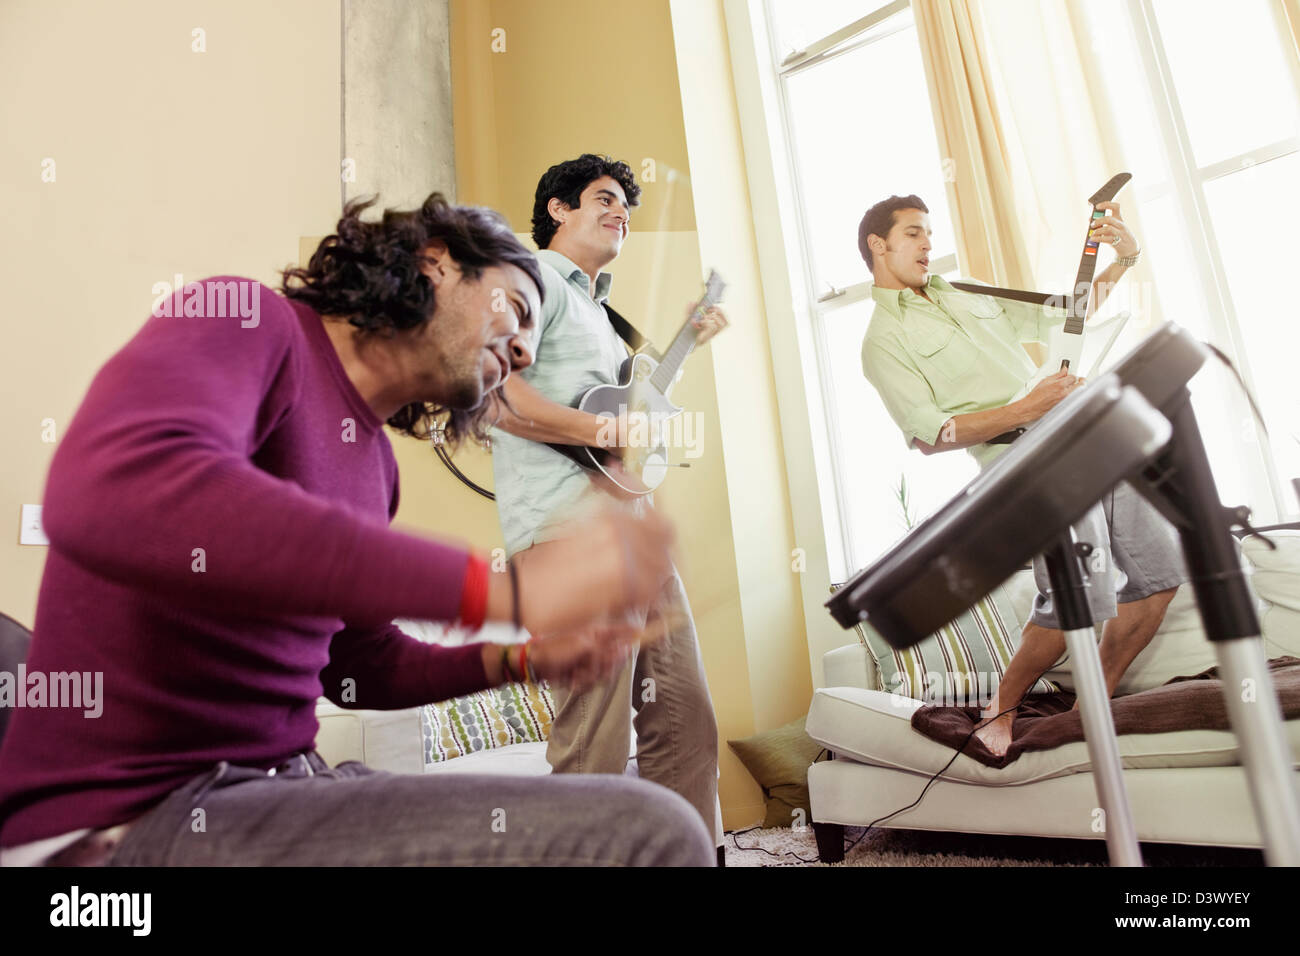 Mexian-American Men Friends Playing Rock Band Music Video Game Stock Photo